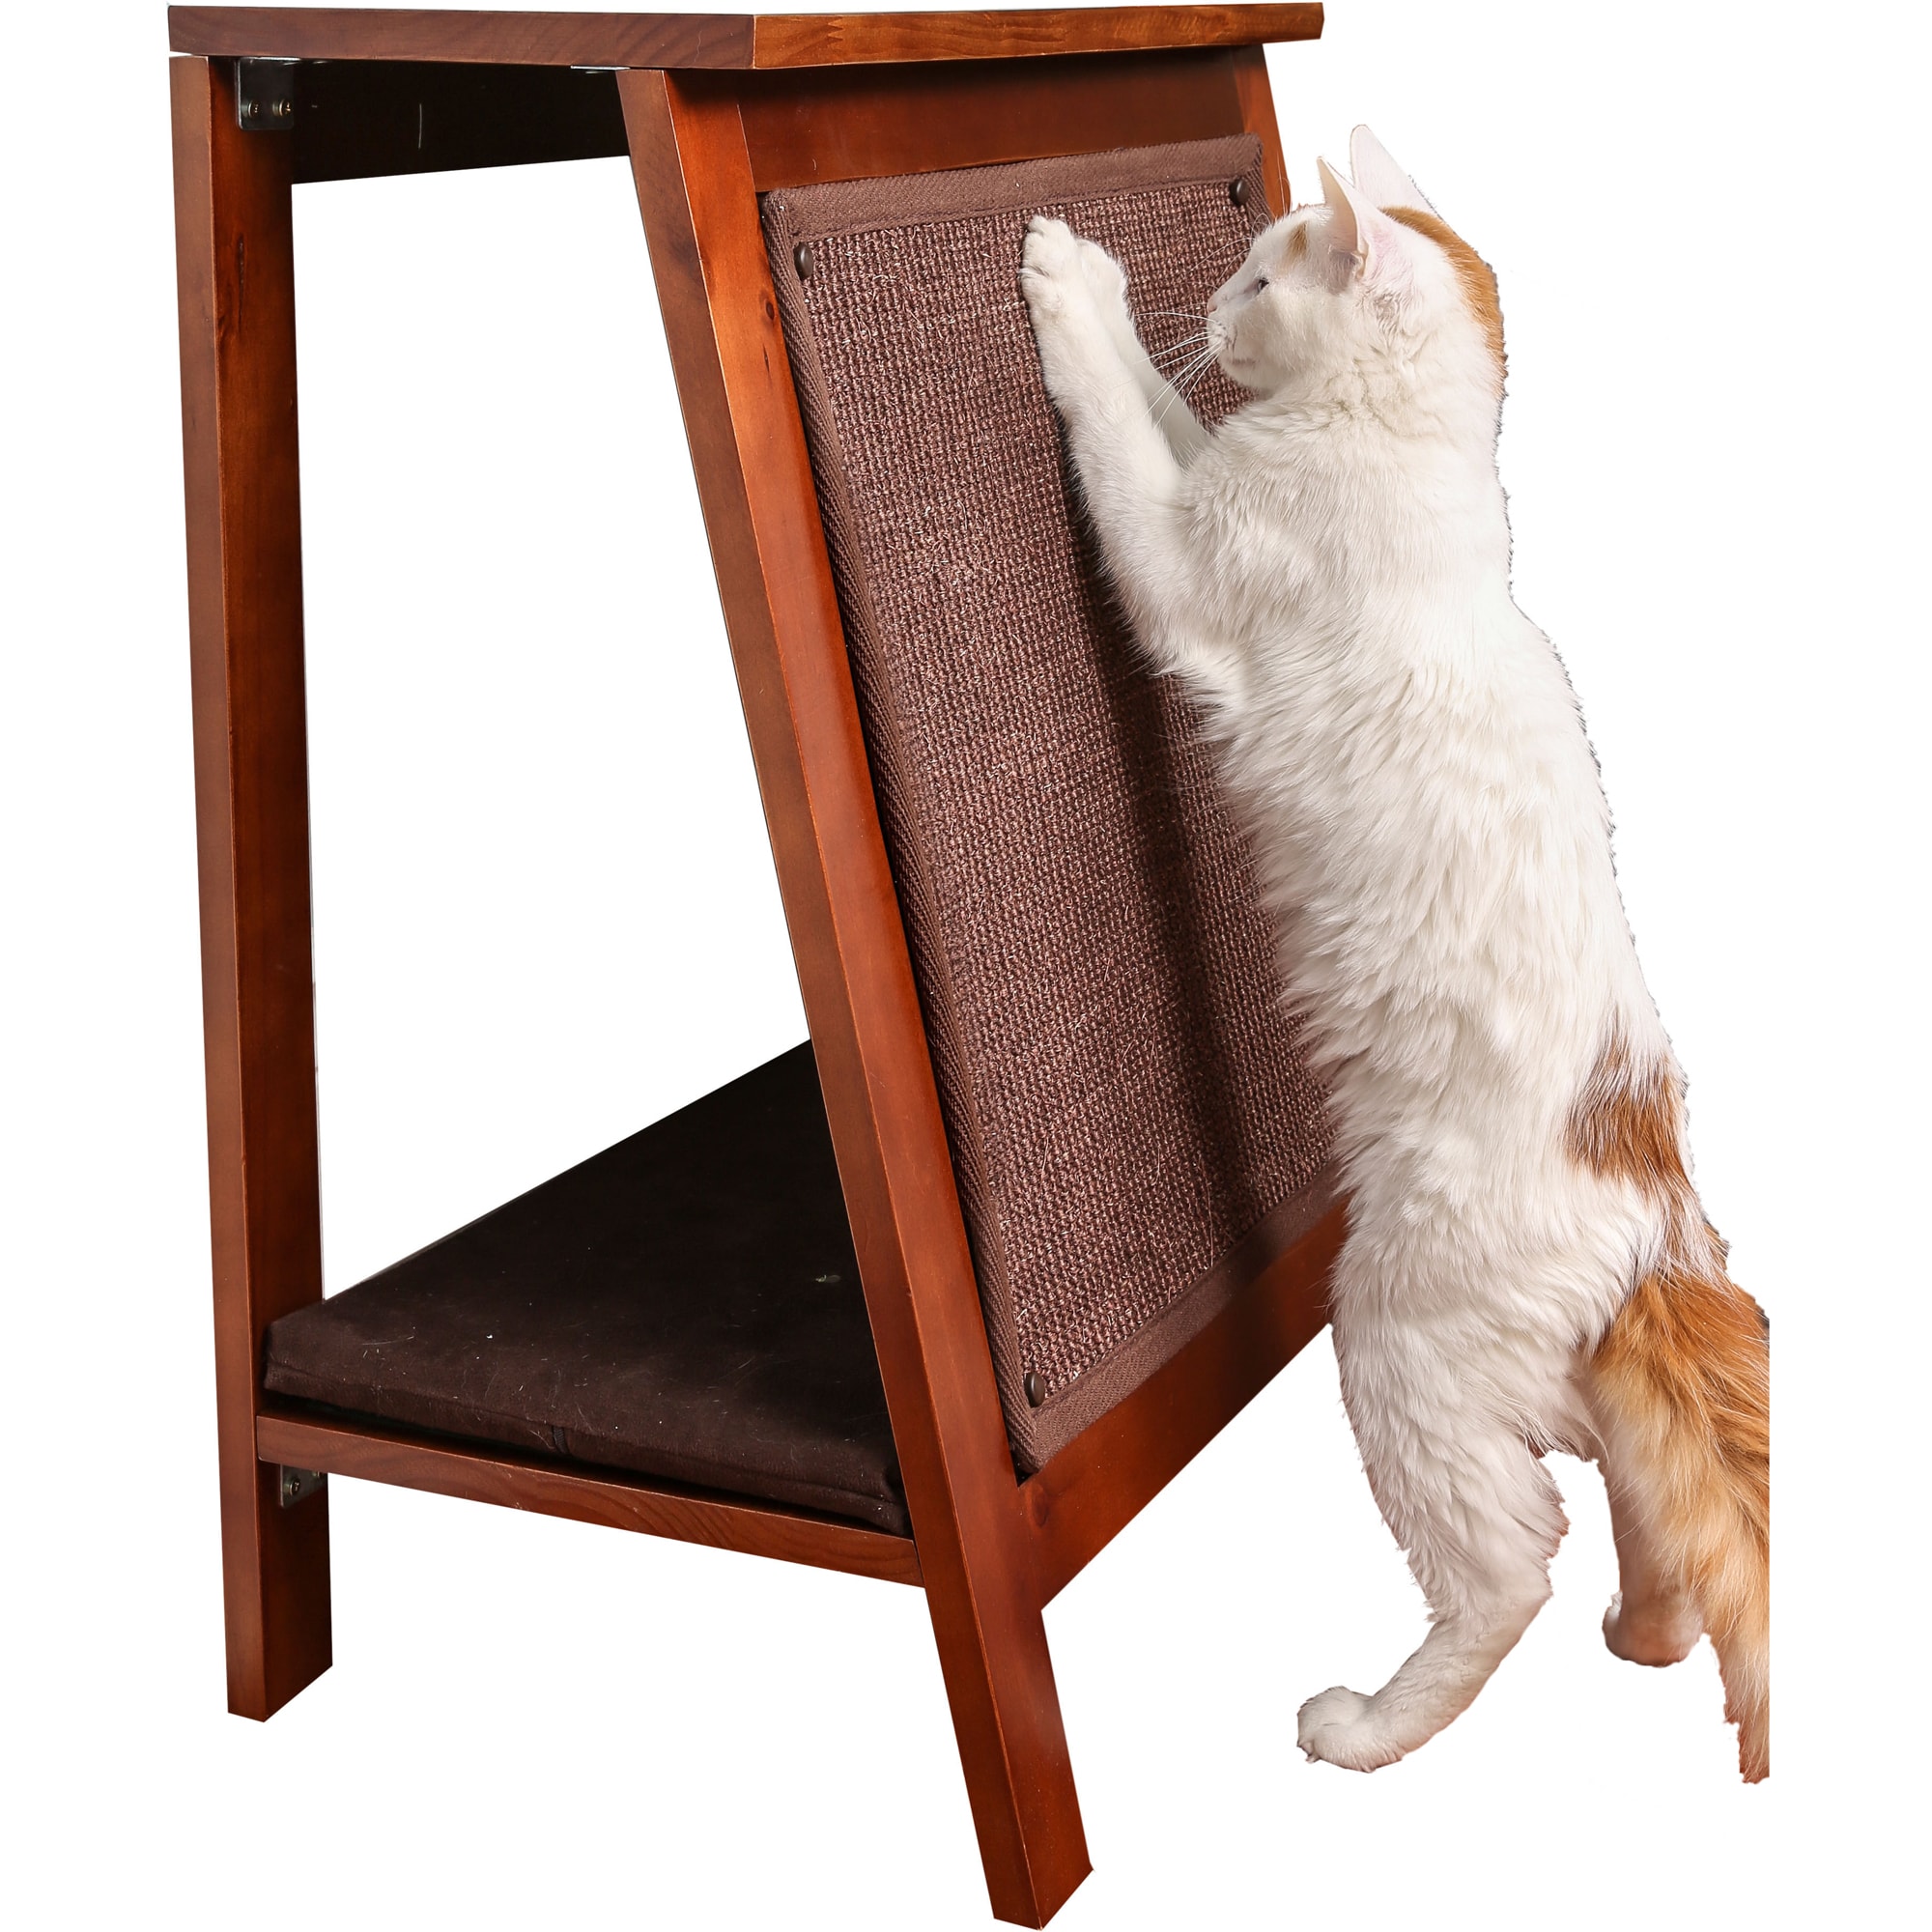 Photos - Other for Cats The Refined Feline The Refined Feline Ain Frame Cat Bed In Mahogany, 23.5"